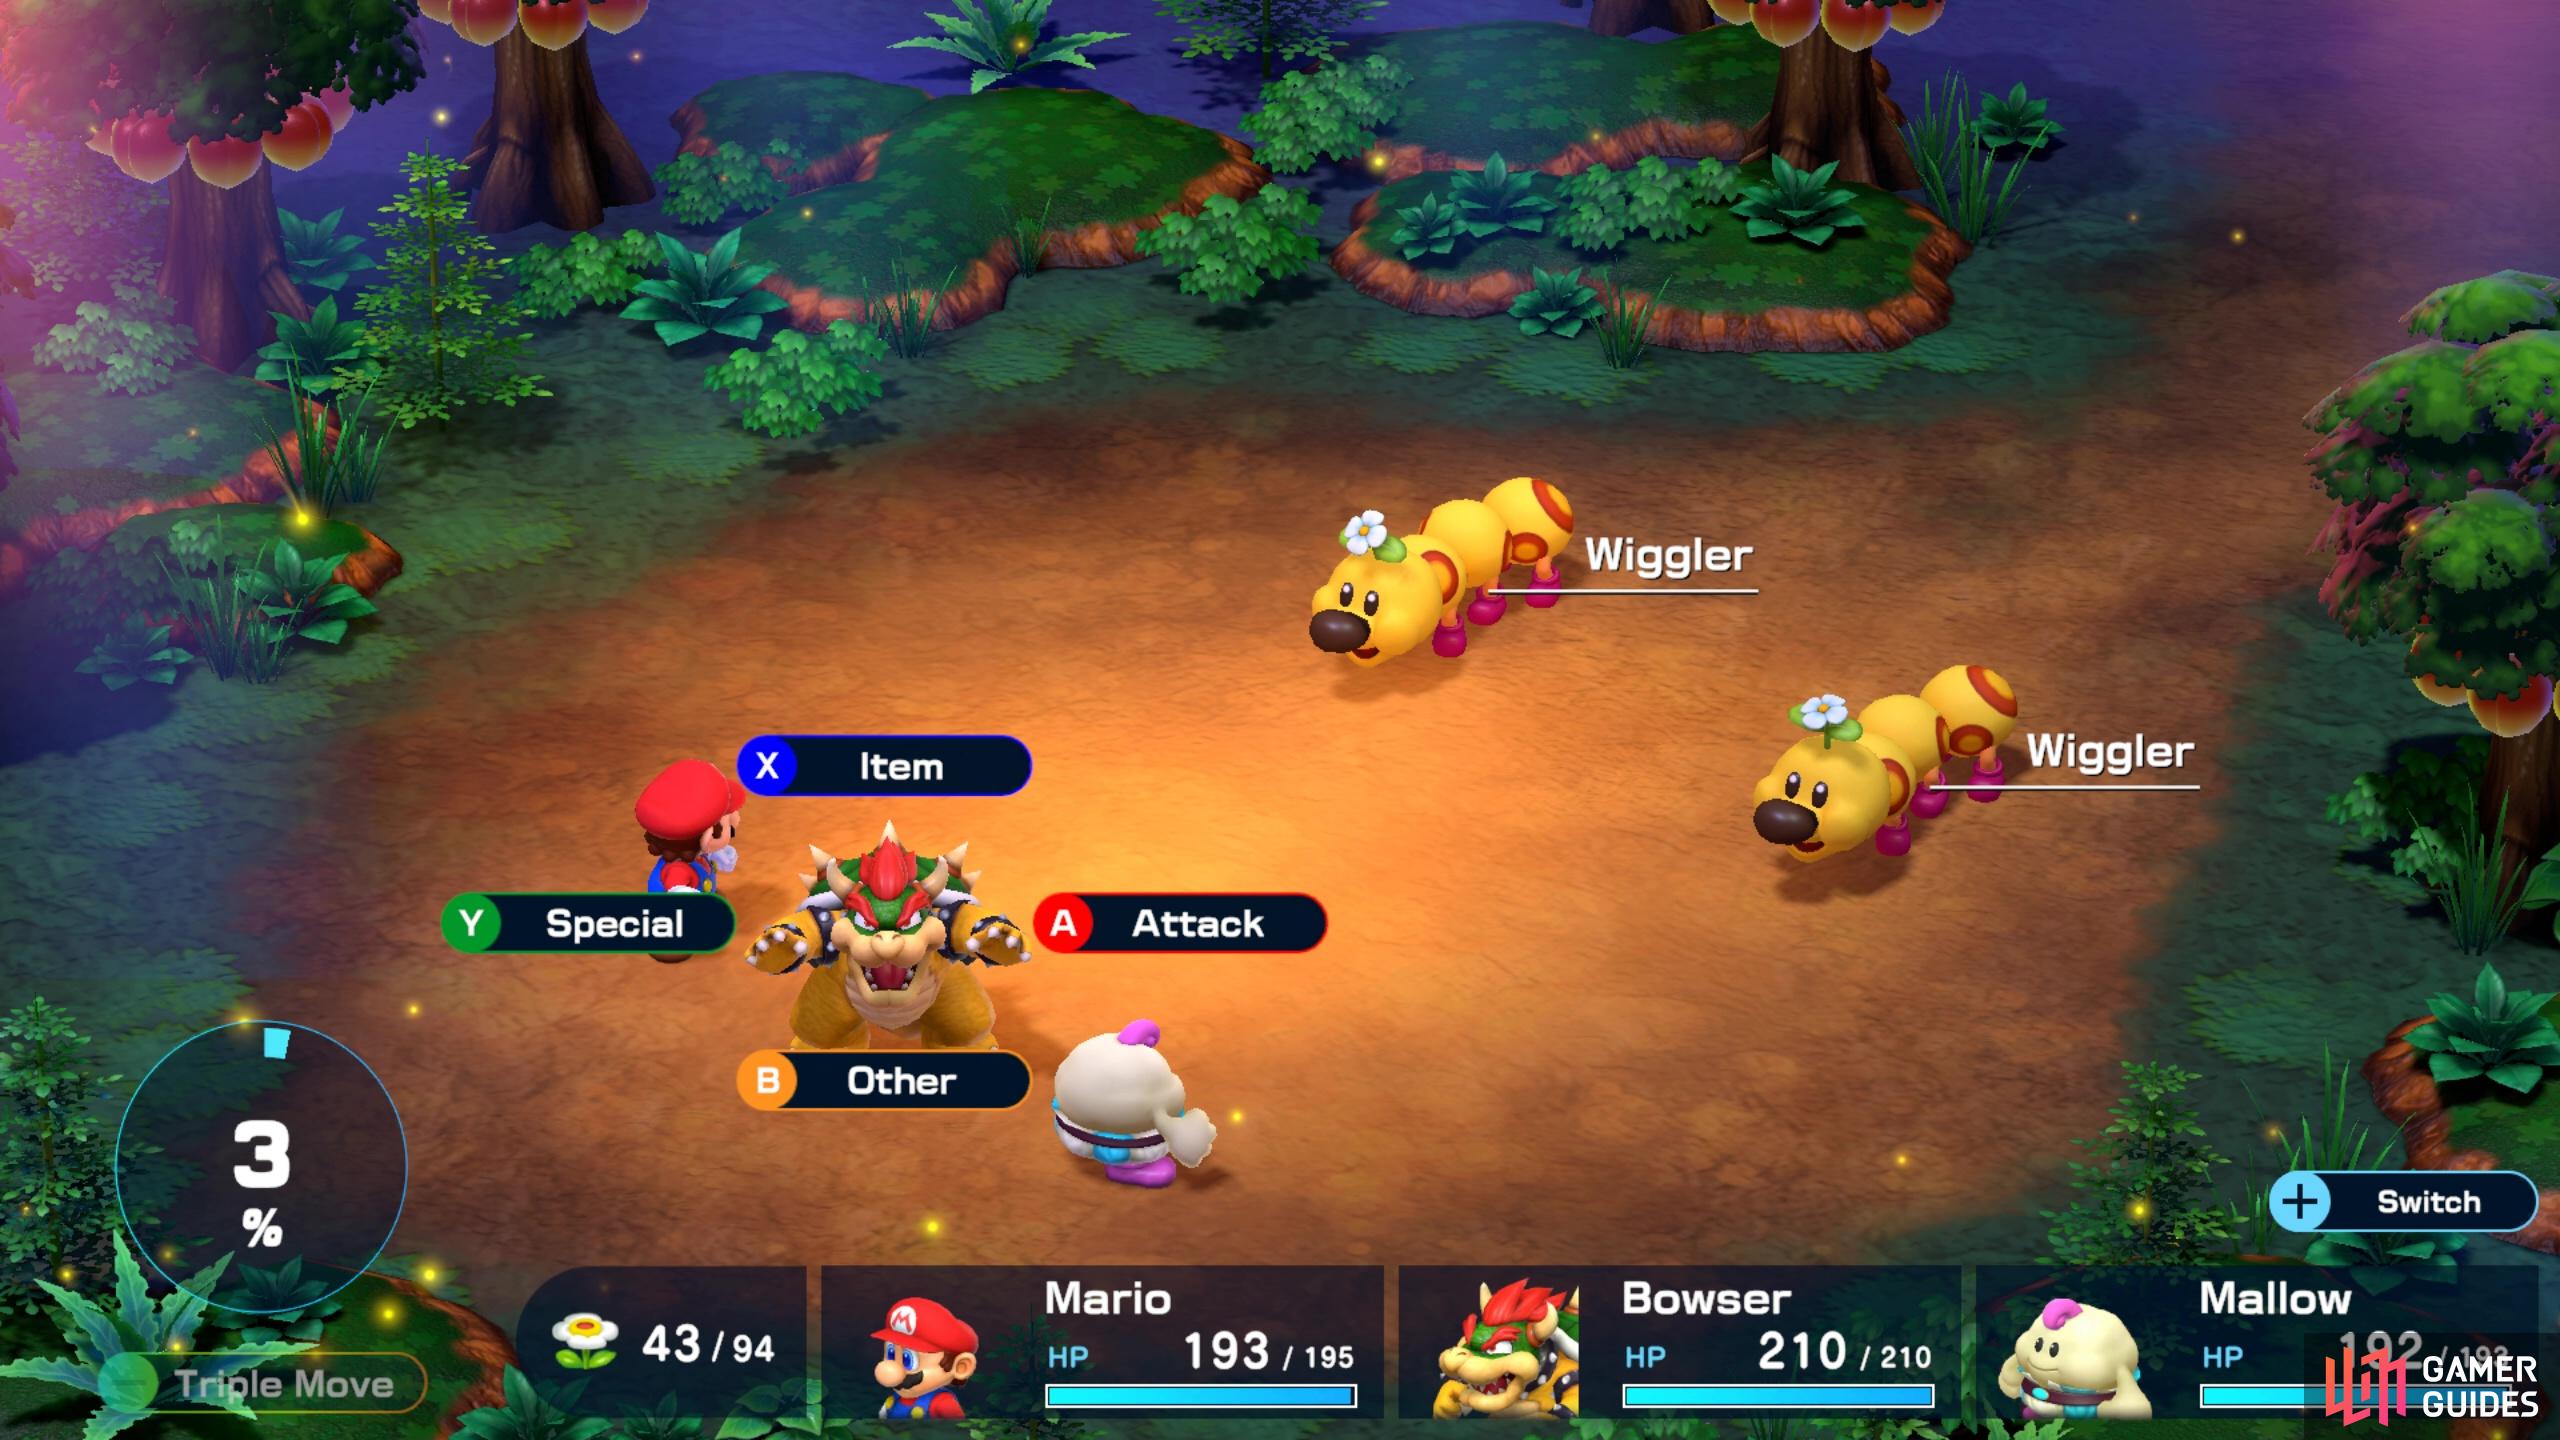 Bowser is the final team member you can recruit and he has a few special attacks up his sleeve!